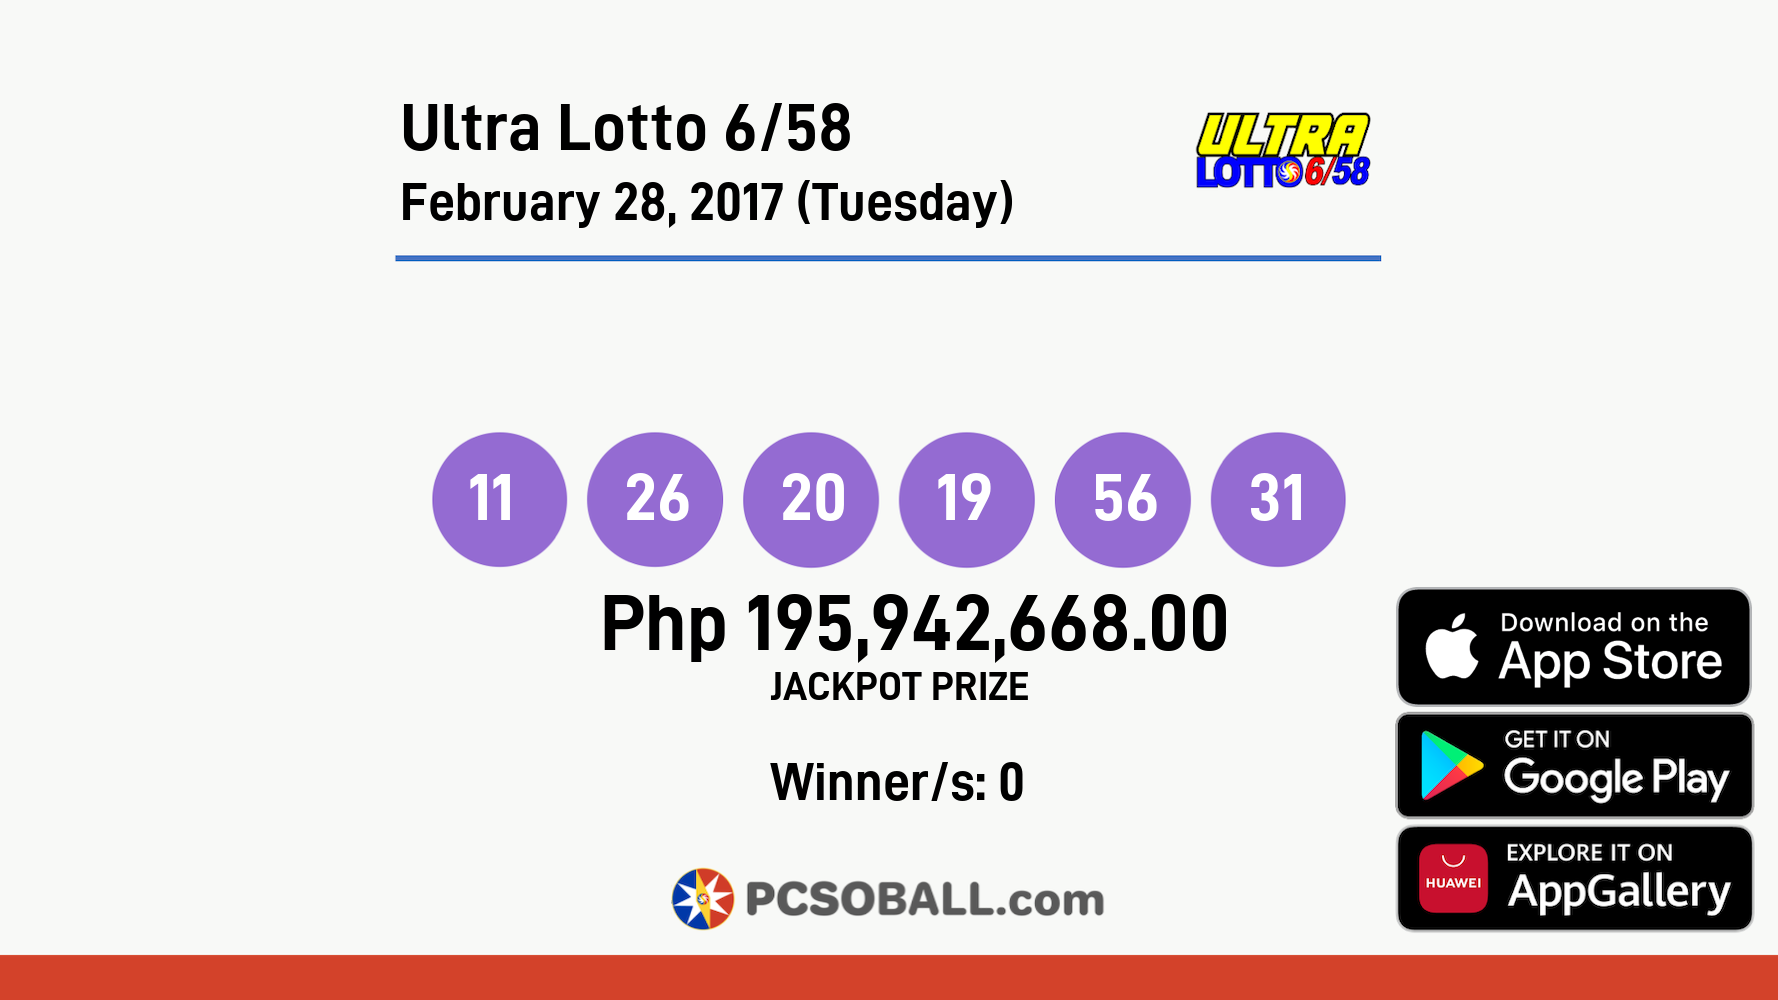 Ultra Lotto 6/58 February 28, 2017 (Tuesday) Result